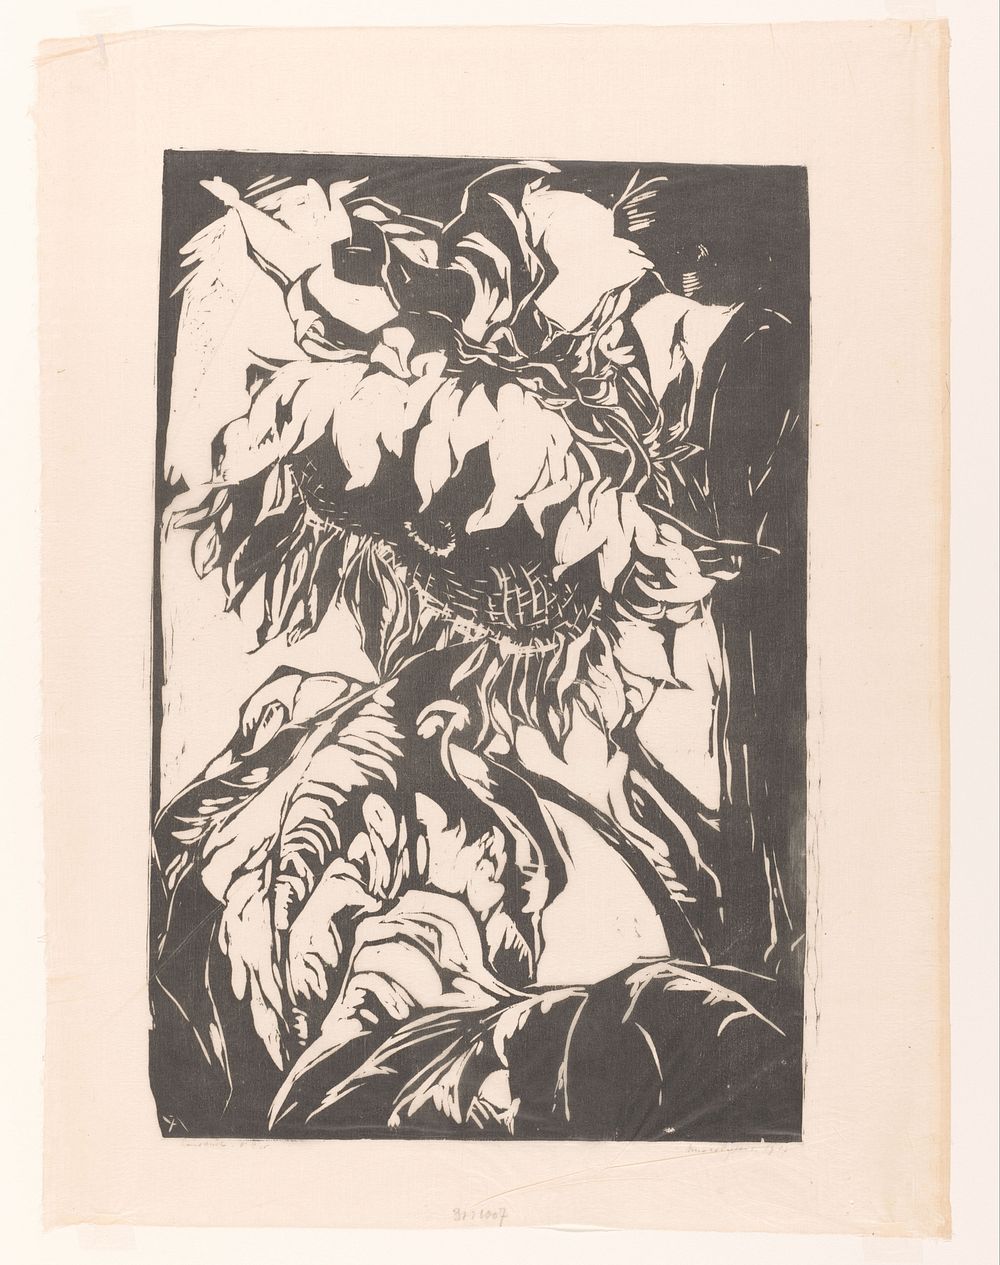 Zonnebloemen (1925) by Arnold Pijpers and Arnold Pijpers